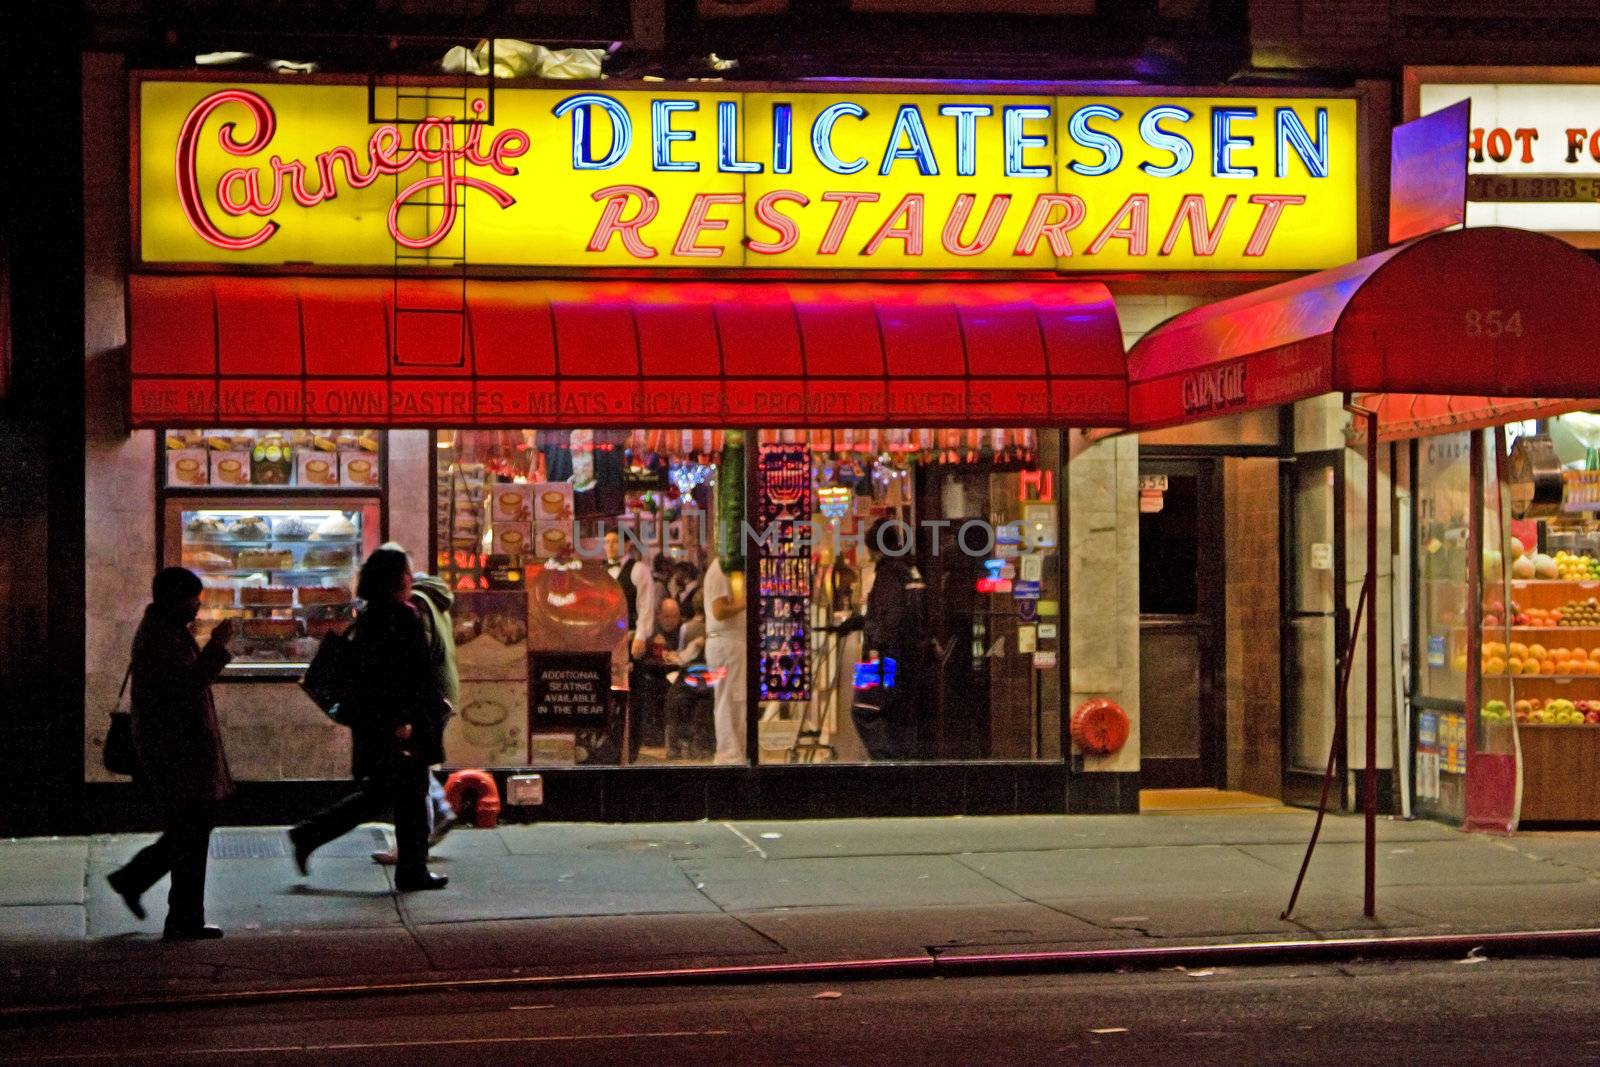 Carnegie Delicatessen Restaurant famous for their Pastrami, on 7th Avenue in New York City